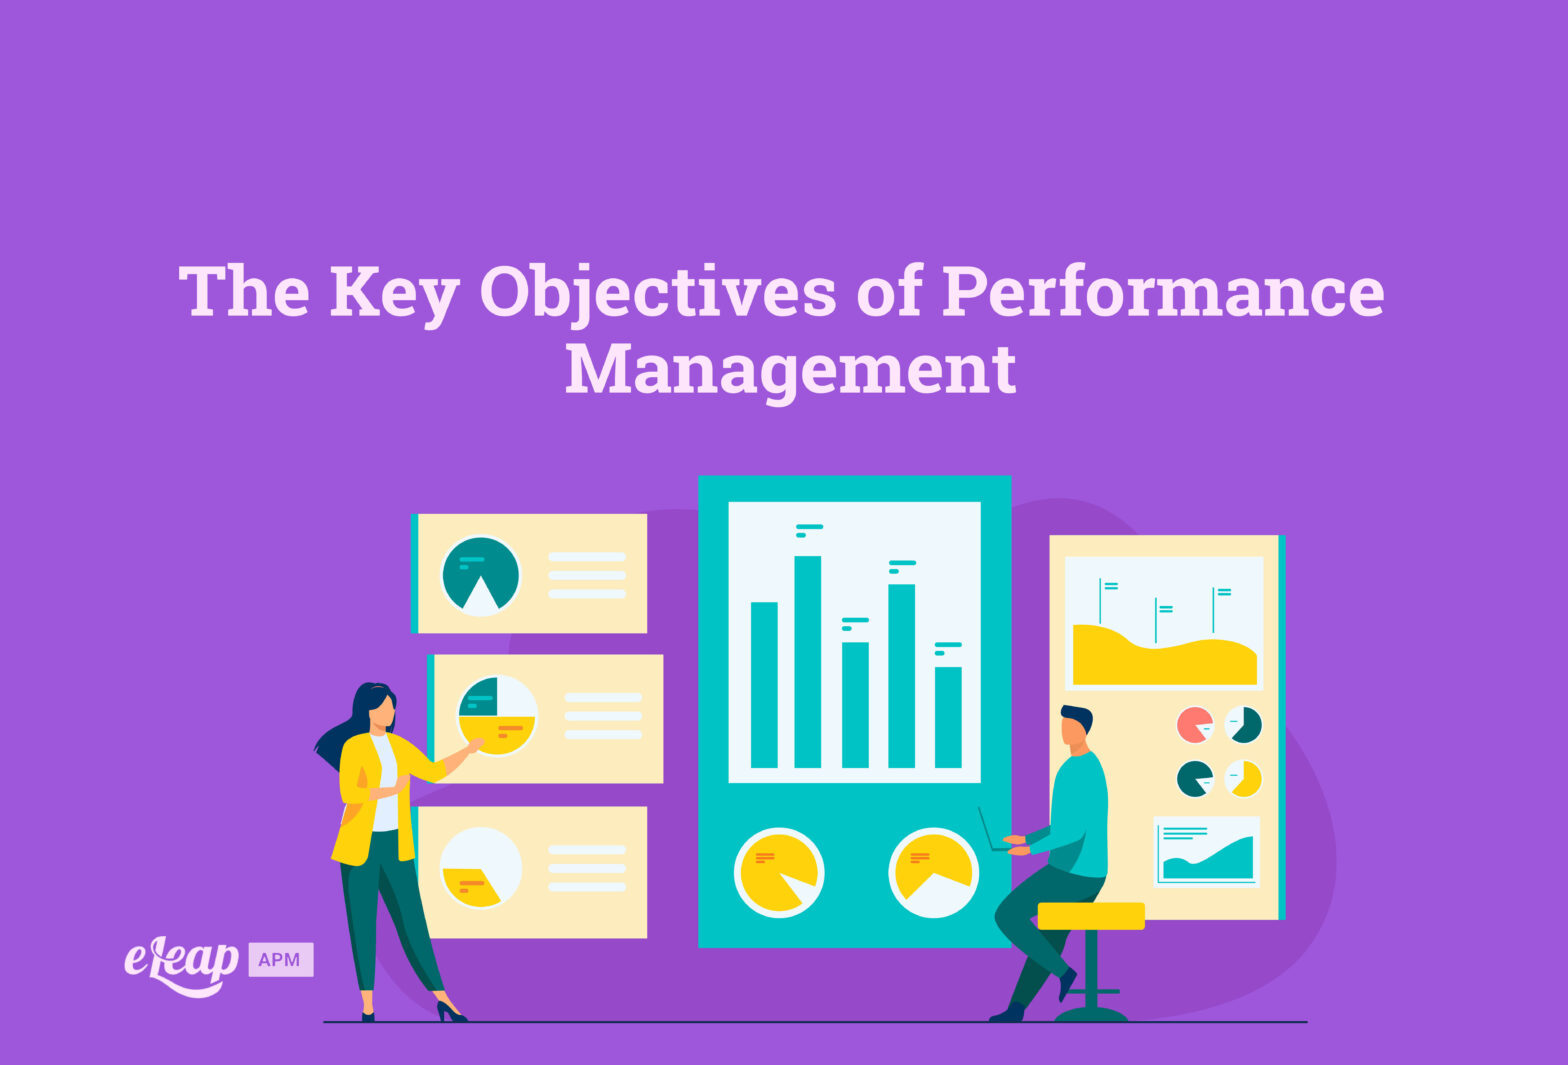 What Is Project Performance Management?